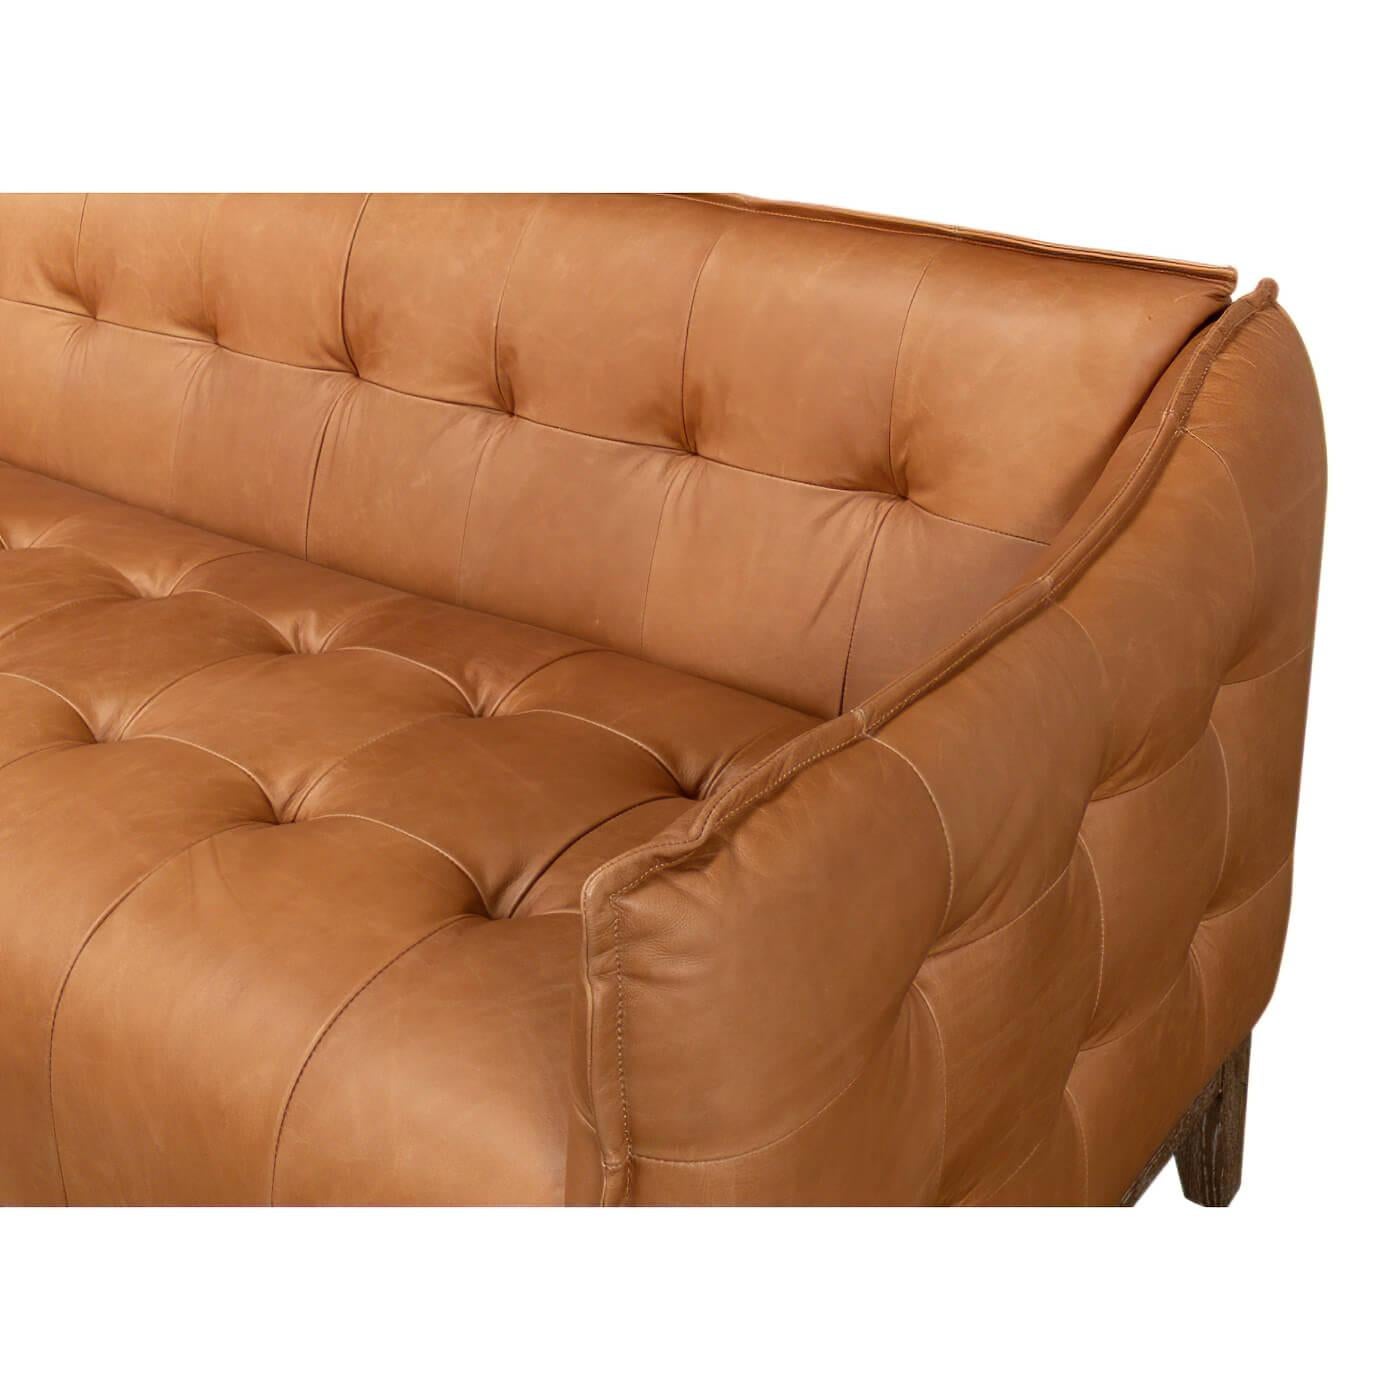 Mid-Century Modern Mid-Century Style Leather Sofa For Sale